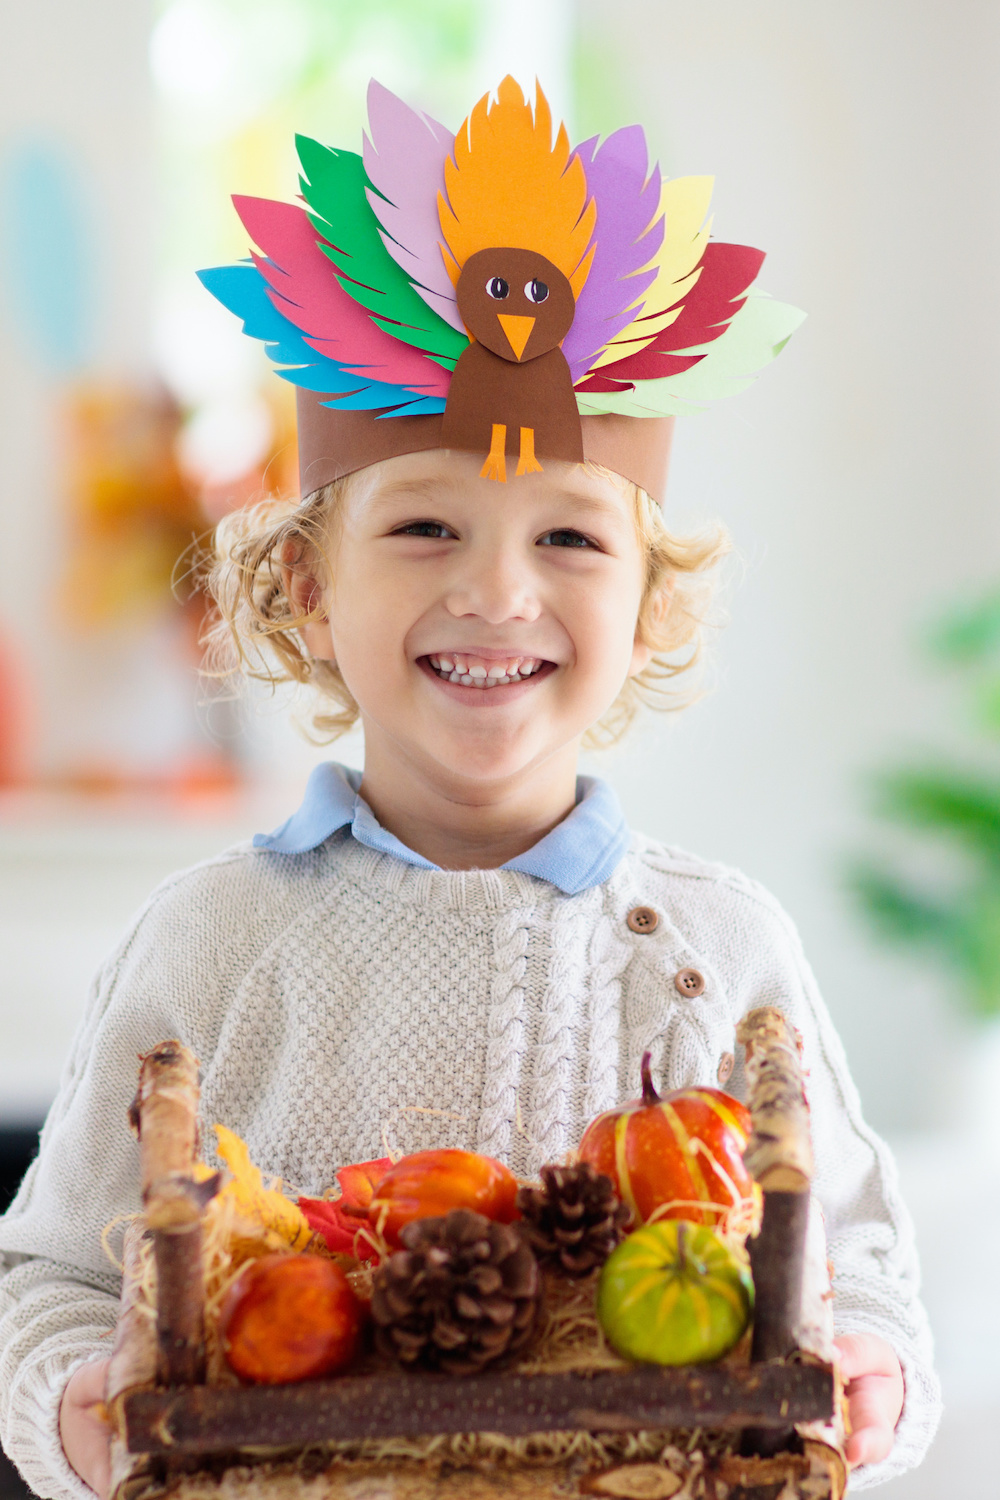 Super Fun DIY Thanksgiving Games and Activities Your Family Will Love